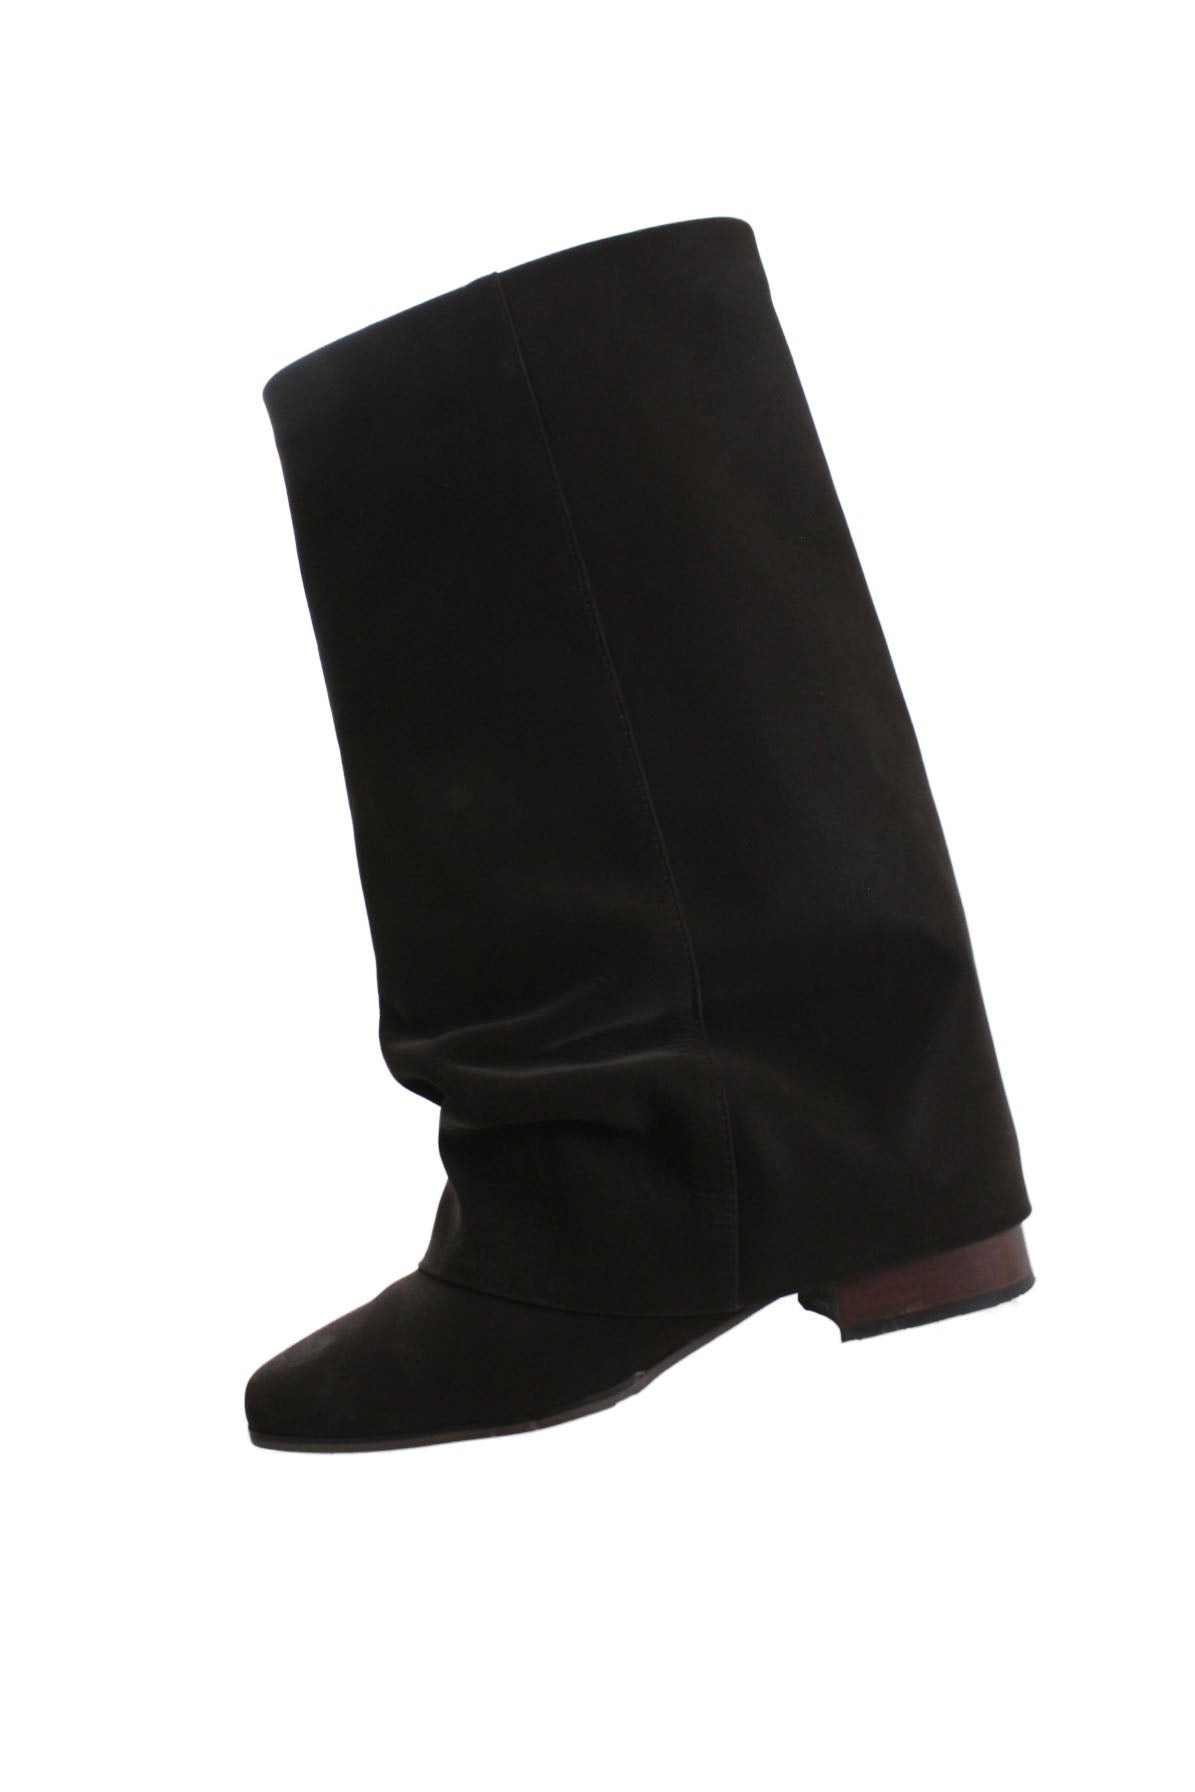 description: three to eighty dark brown wrinkle leather boots. features rounded toe silhouette, folded up silhouette, natural wrinkle design, and unique texture similar to suede.  